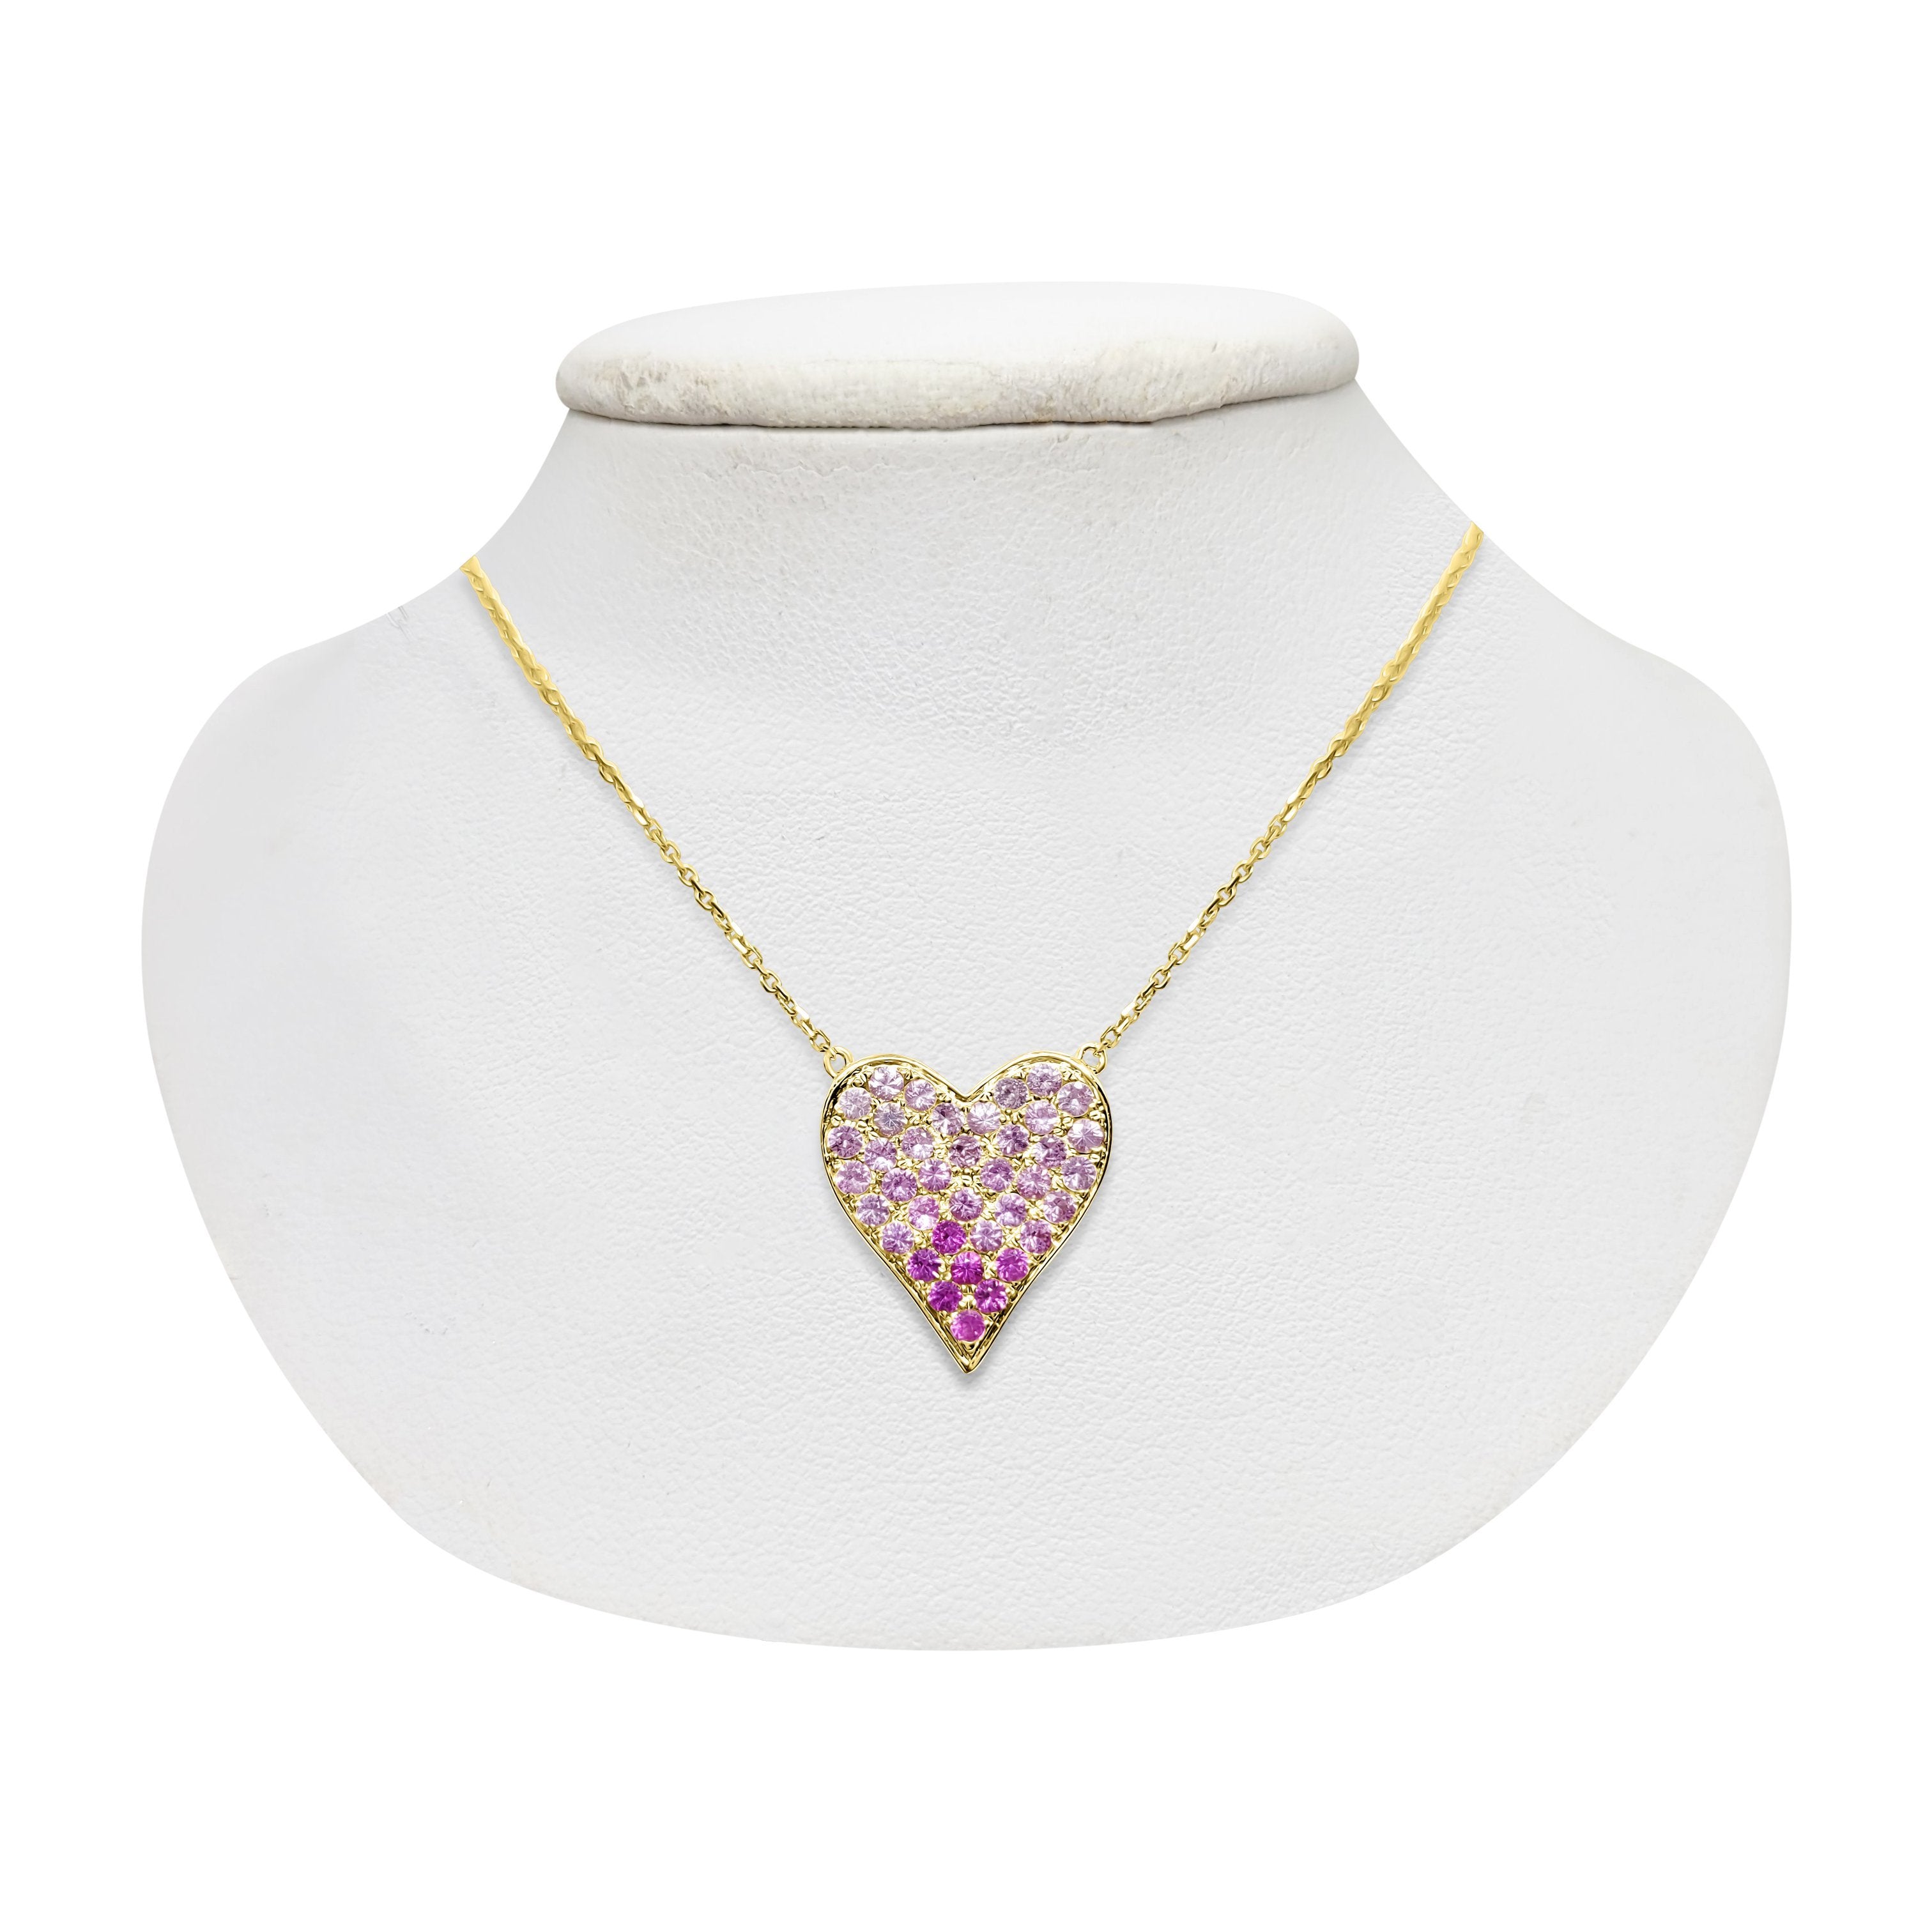 heart necklace with pink stones